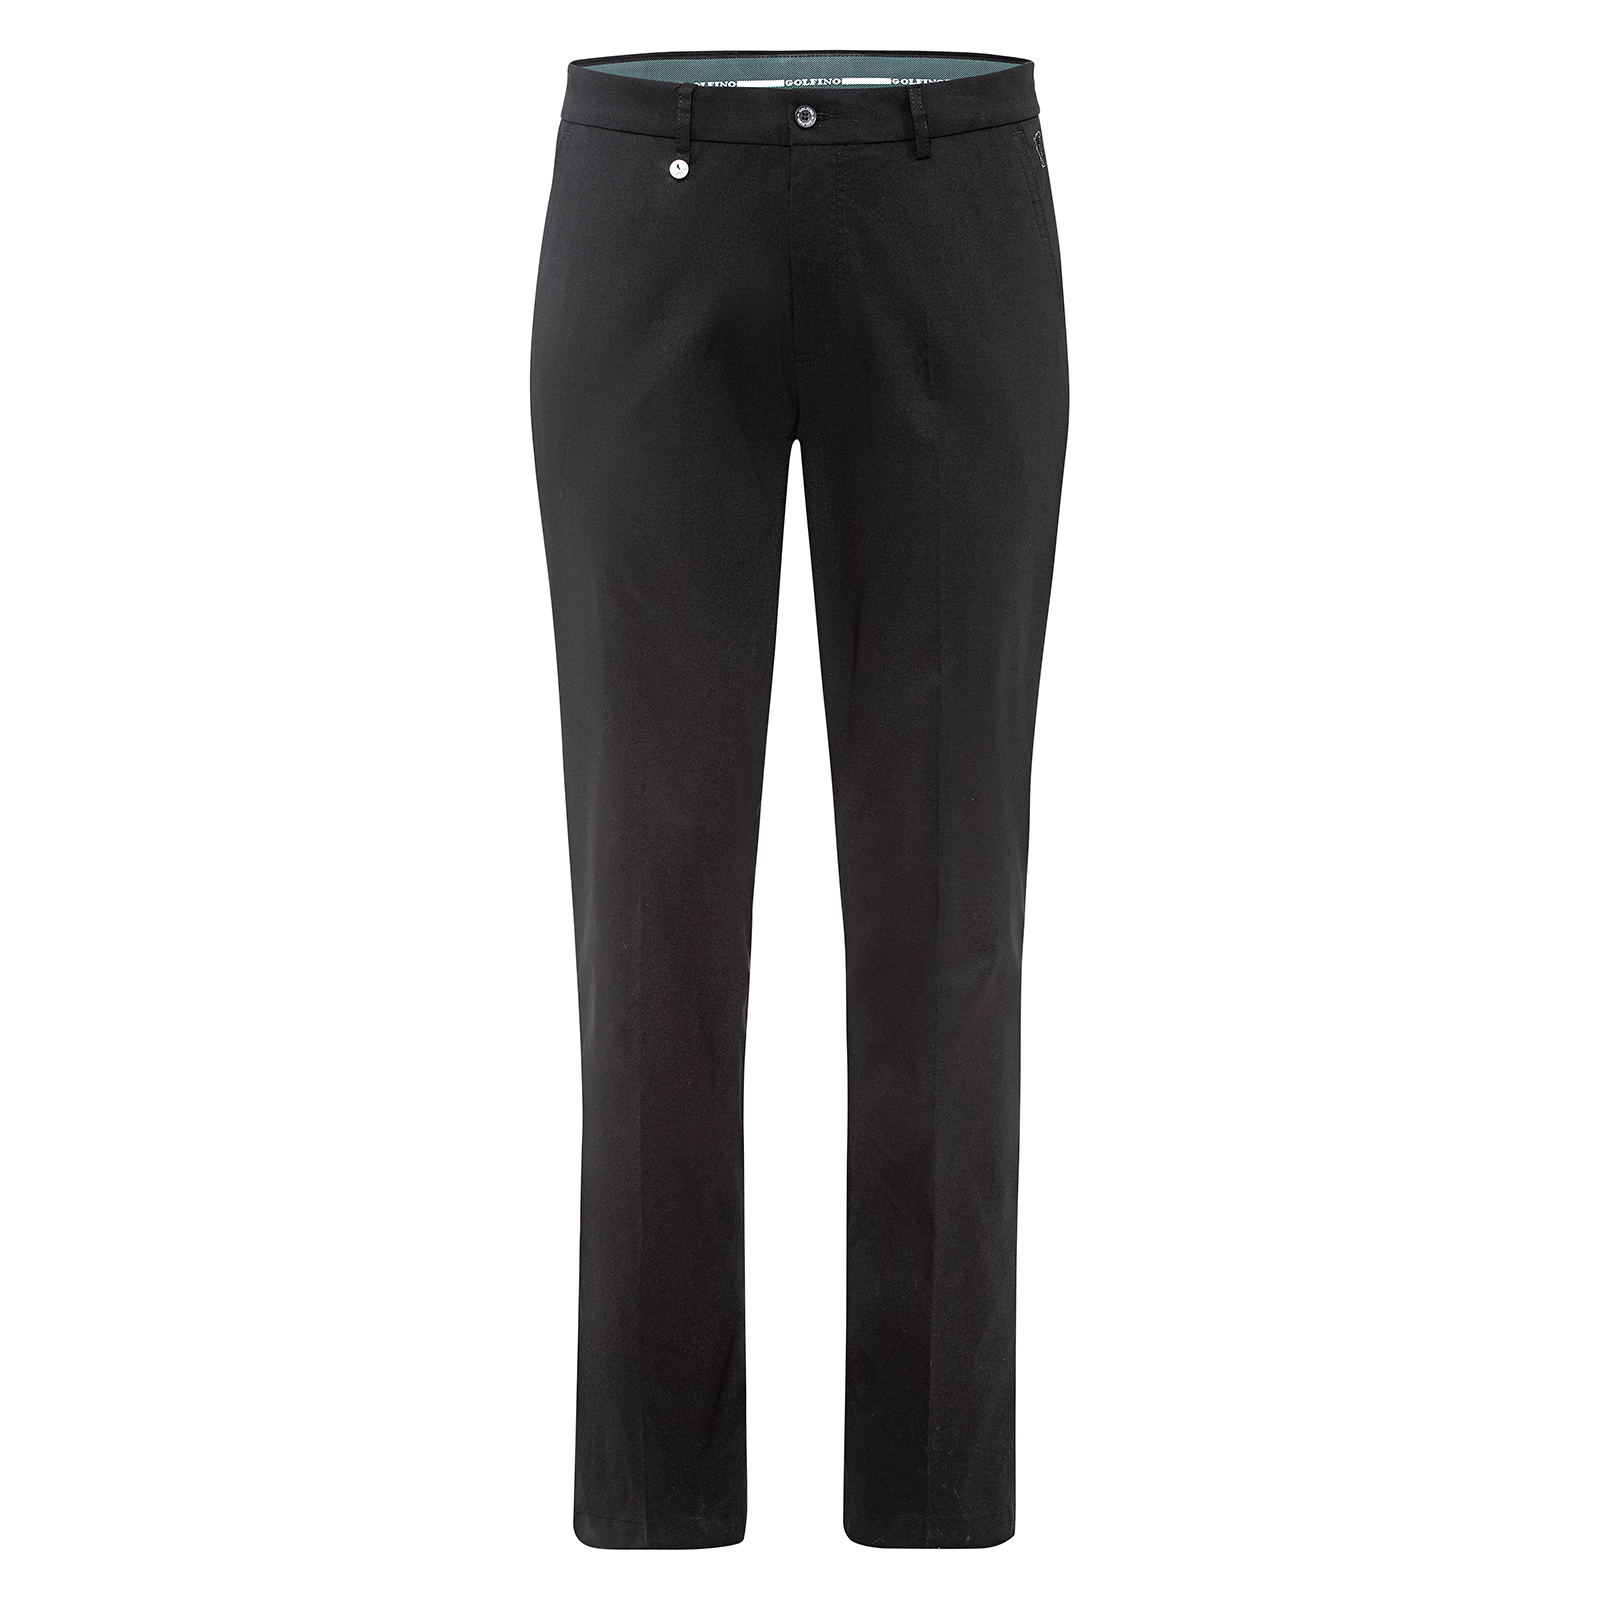 Men's practical and versatile golf trousers 